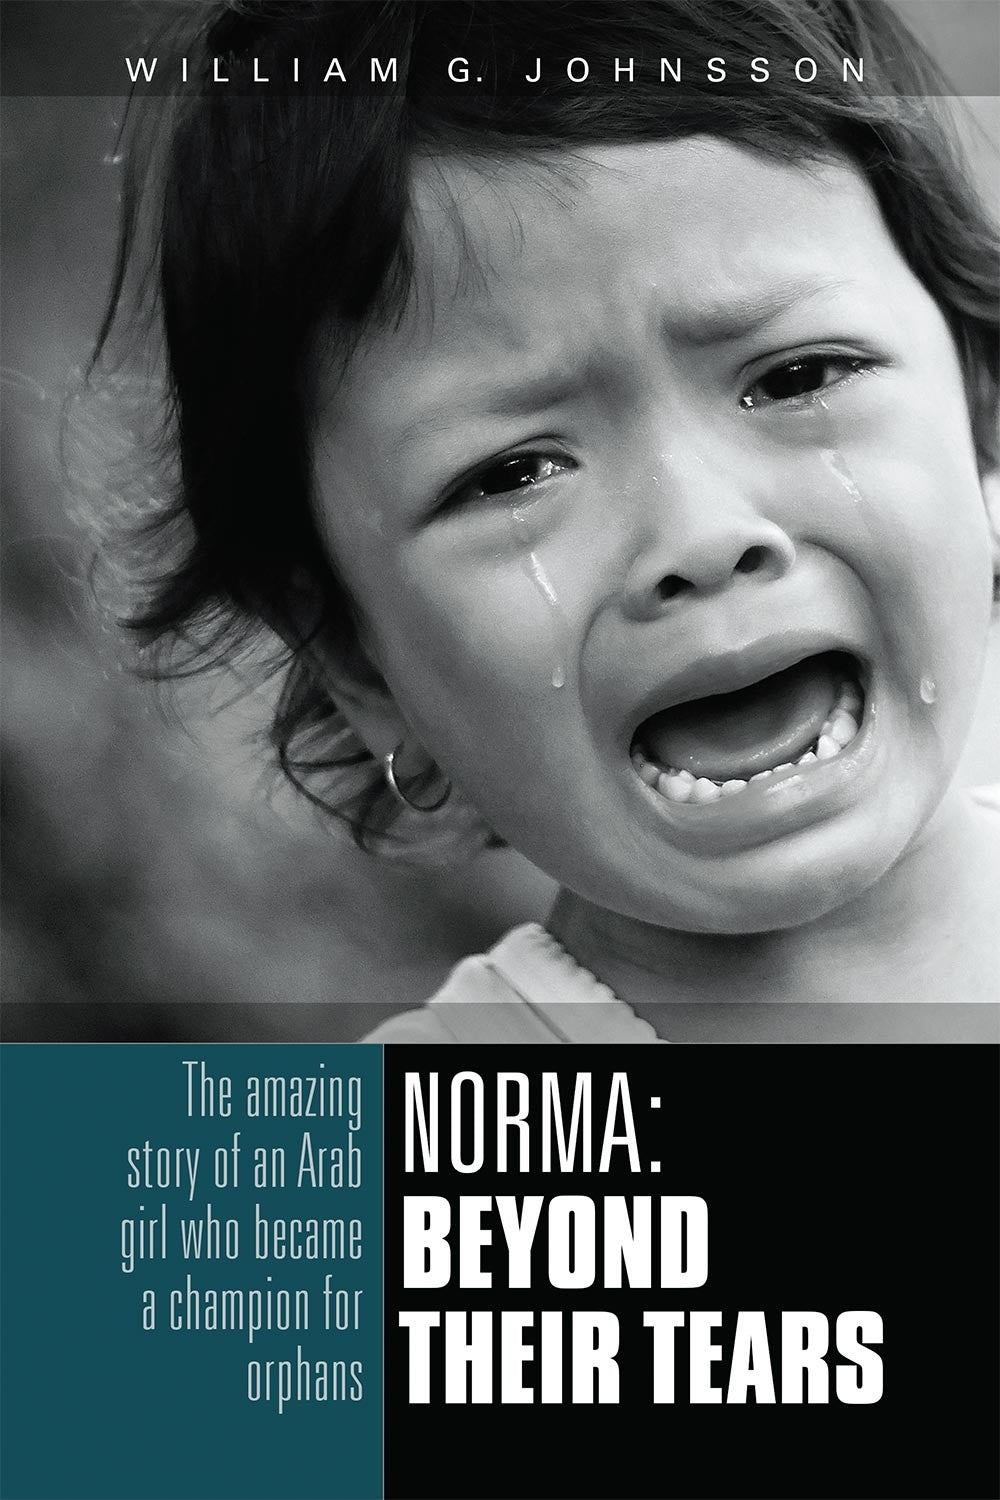 Norma: Beyond Their Tears - (By William G. Johnsson)